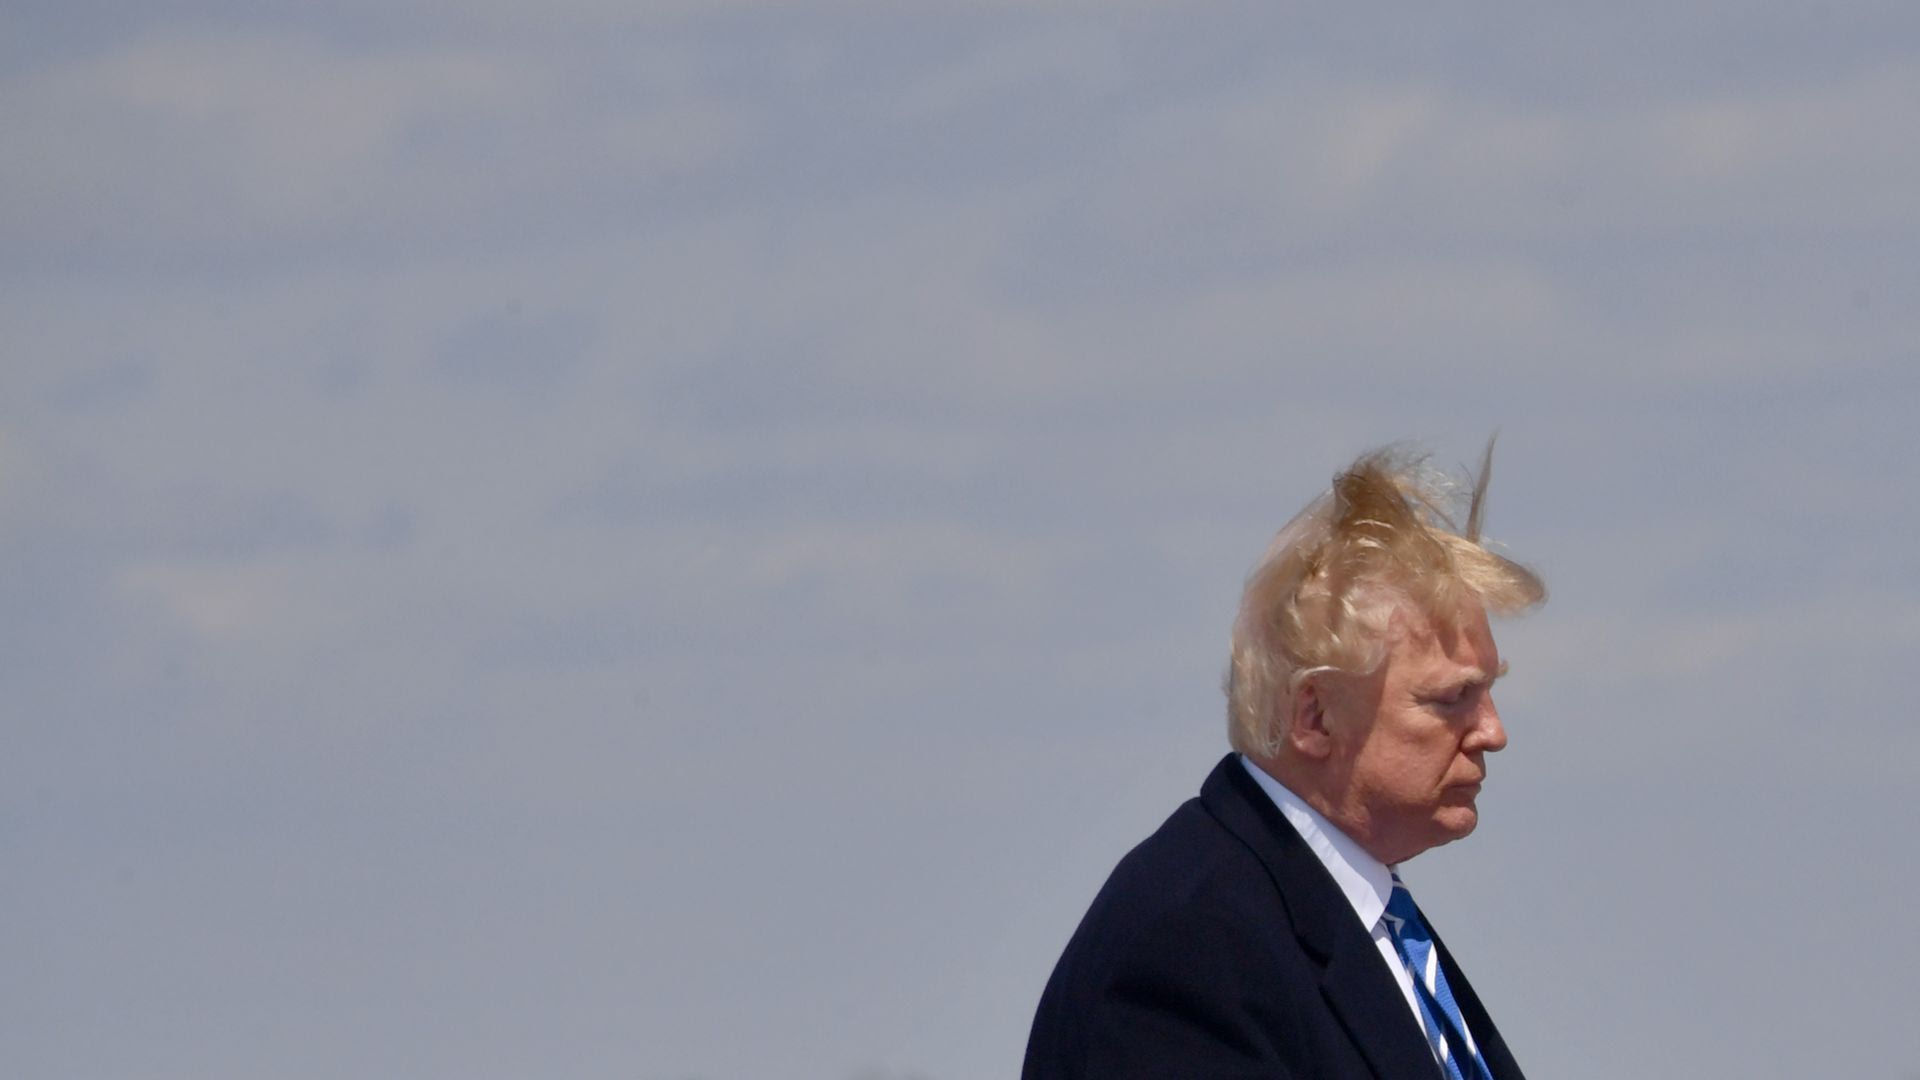 President Trump's hair blows in the wind